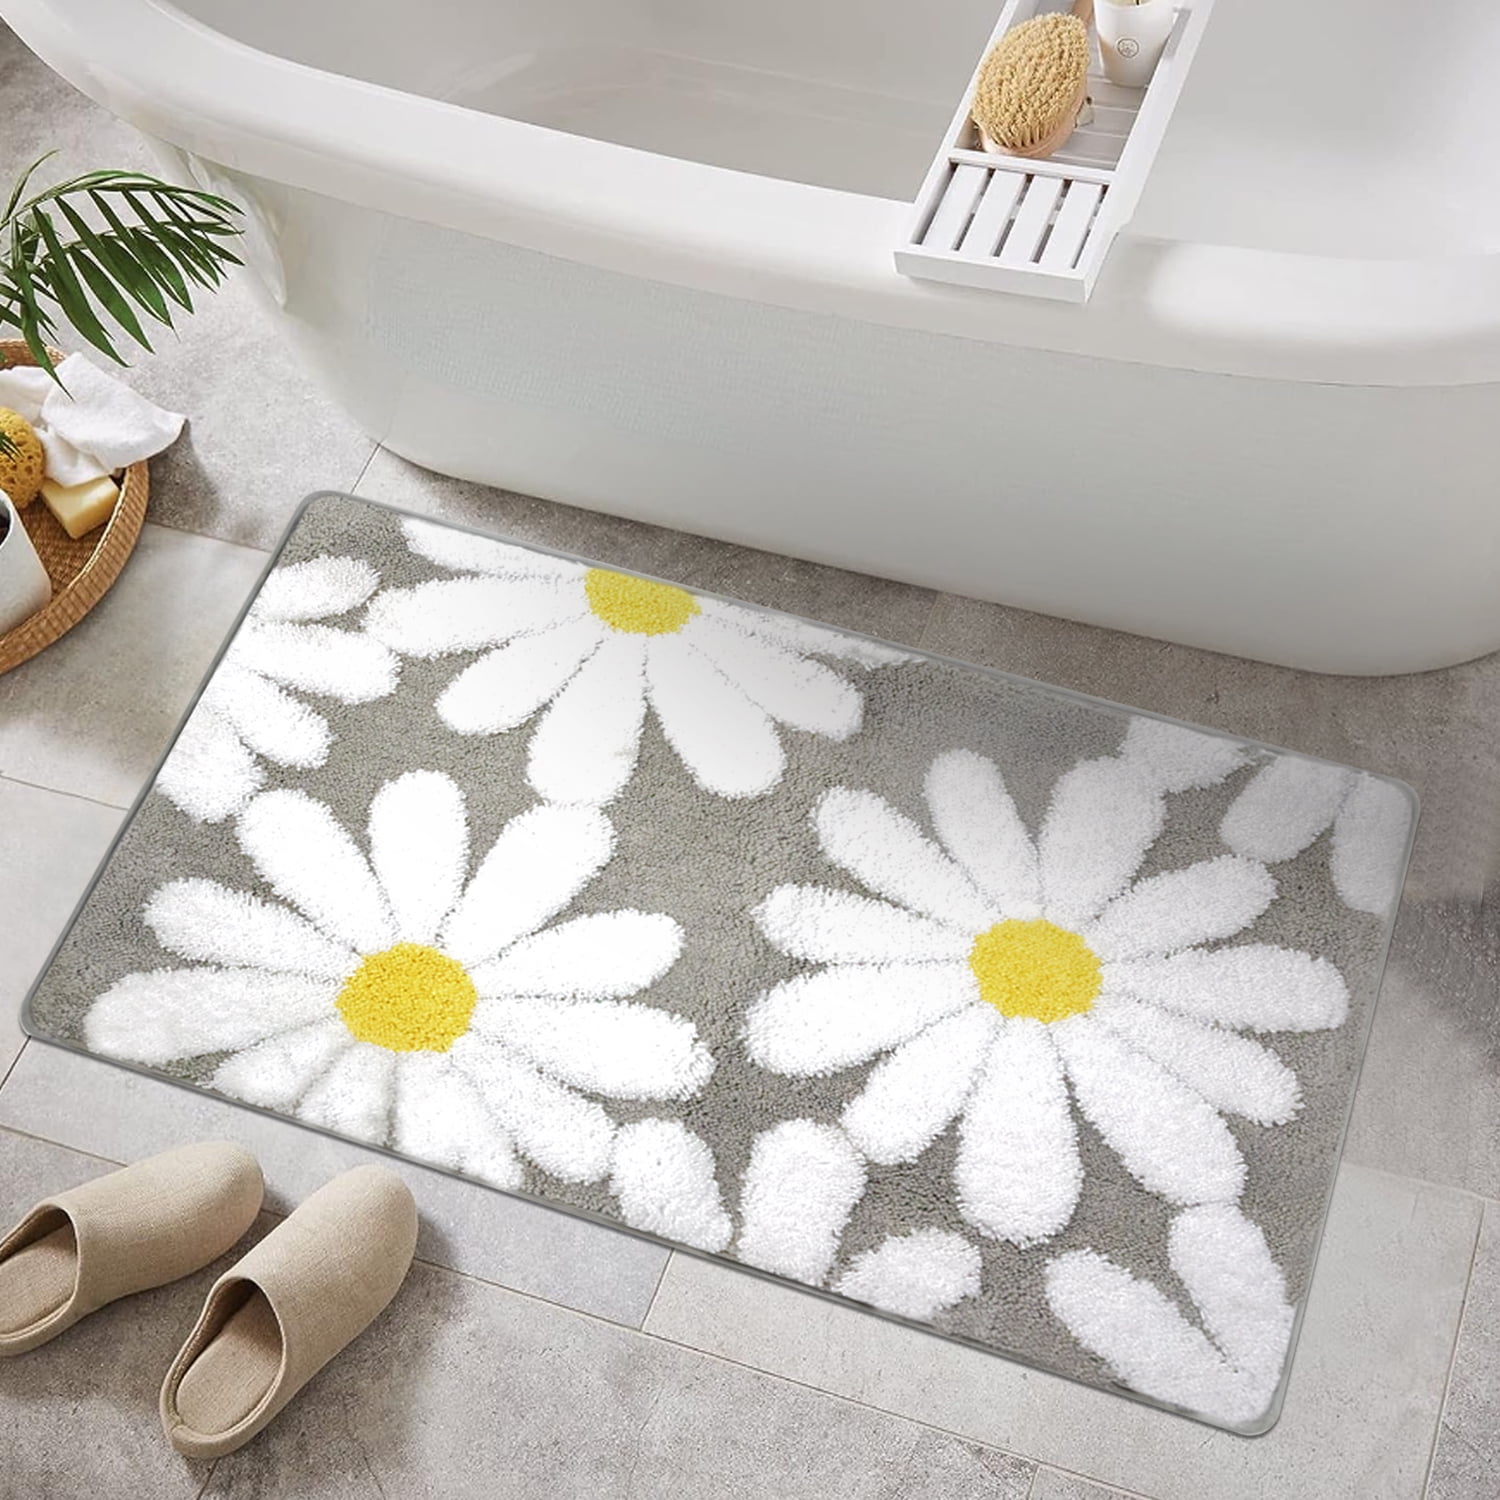 Astarin Extra Soft Cute Daisy Gray Bathroom Rugs,Absorbent Non-Slip Bath  Mats Microfiber Shaggy Thick Carpet,Waterproof Back/Machine Washable for  Tub, Bathroom and Shower(16×24, Gray) 